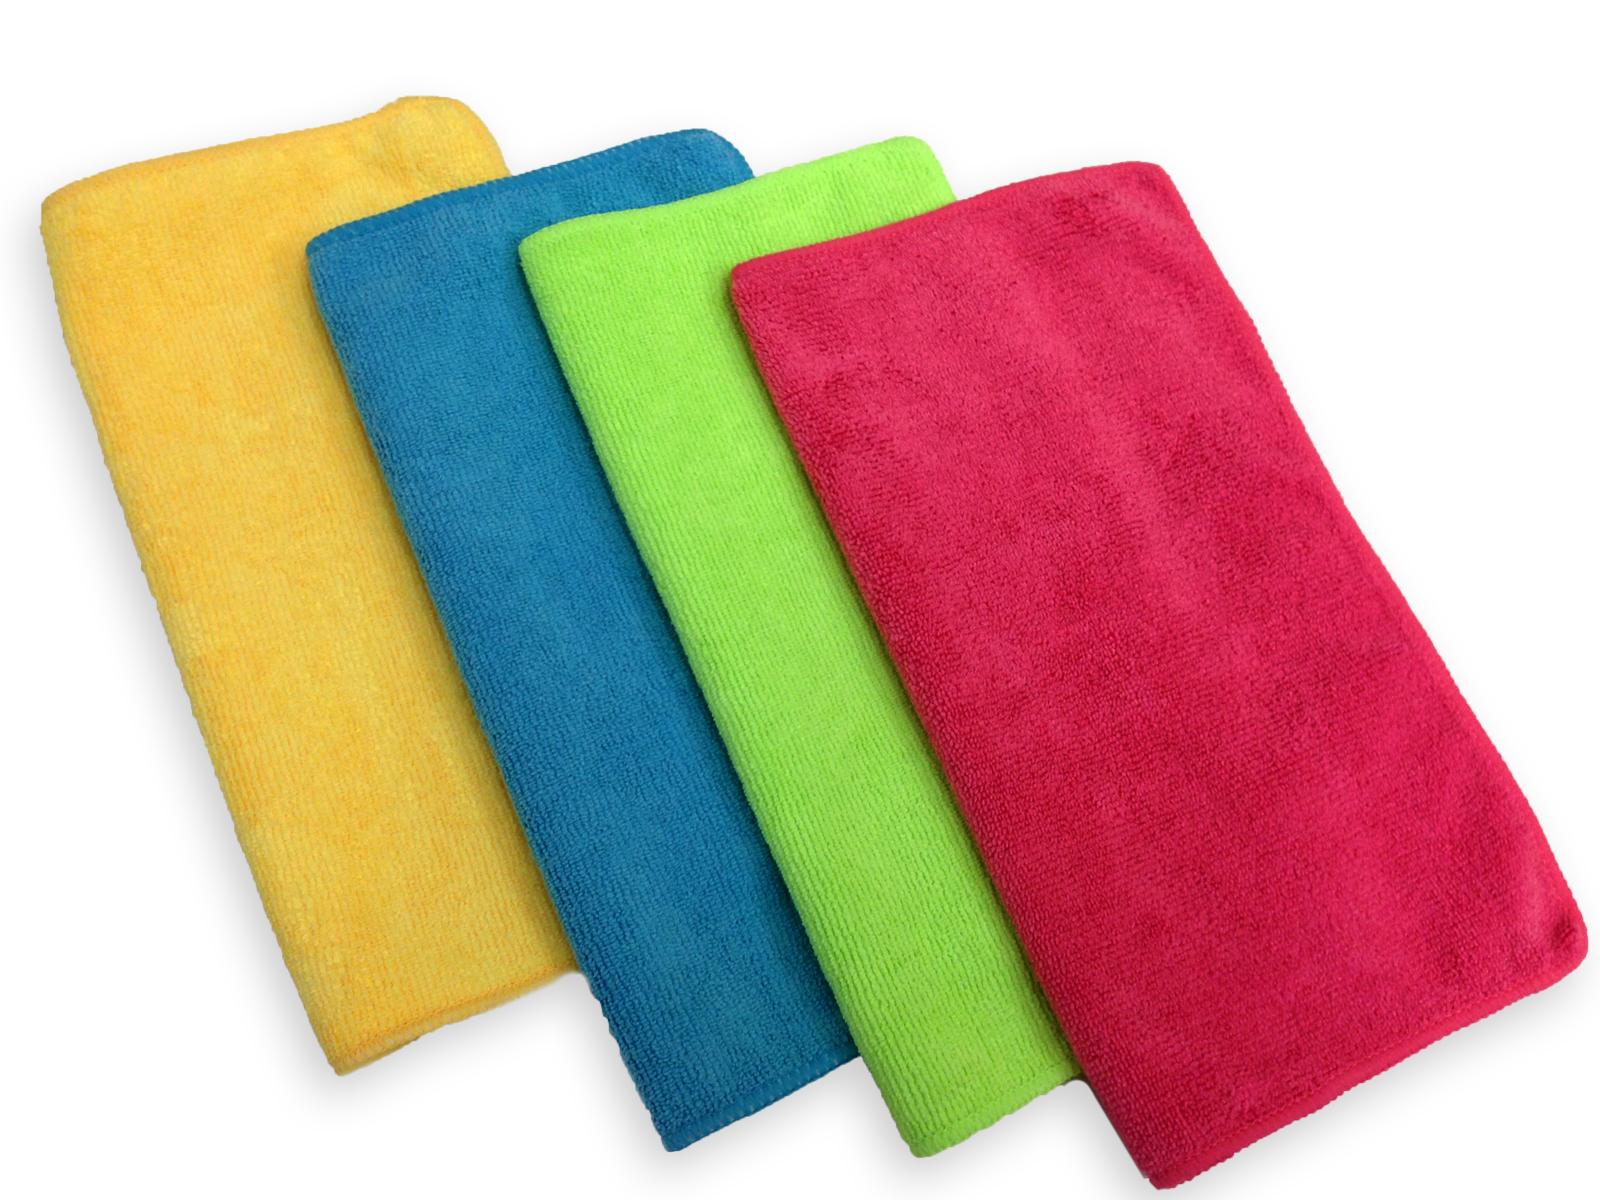 240 Pink Microfiber 14"x14" Cleaning Detailing Cloths Towel Auto Car Rag 300GSM